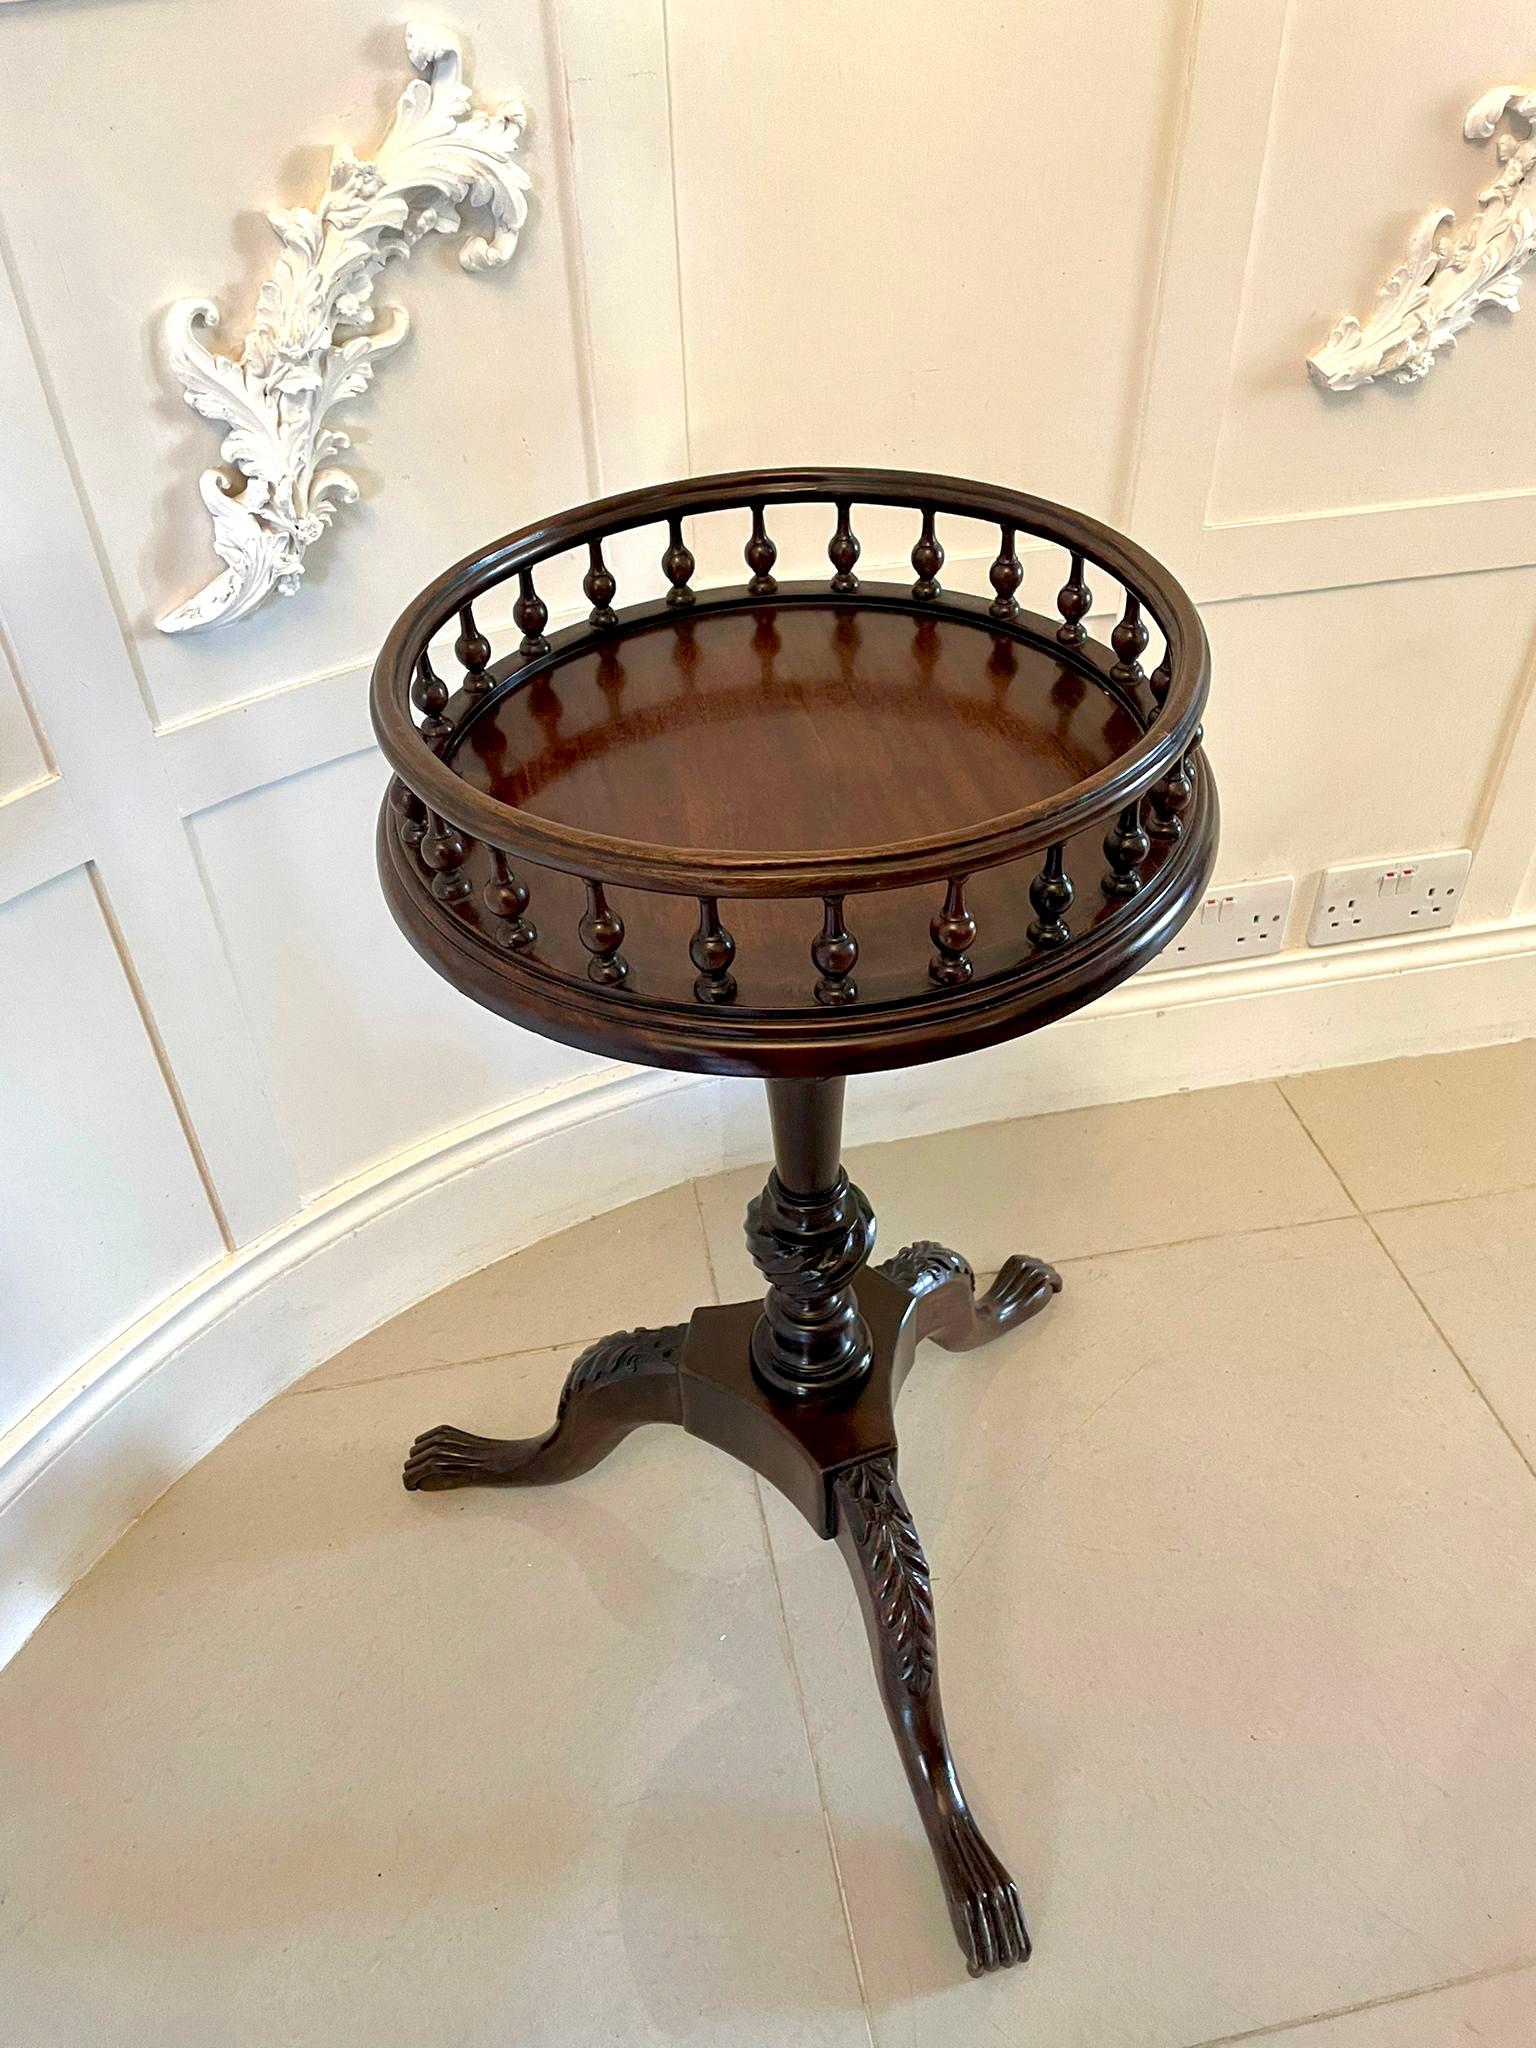 Antique Victorian quality mahogany circular lamp table having a quality circular top with a spindle gallery supported on a superb turned twist tapering column platform base with three shaped carved mahogany cabriole legs with claw feet.

A